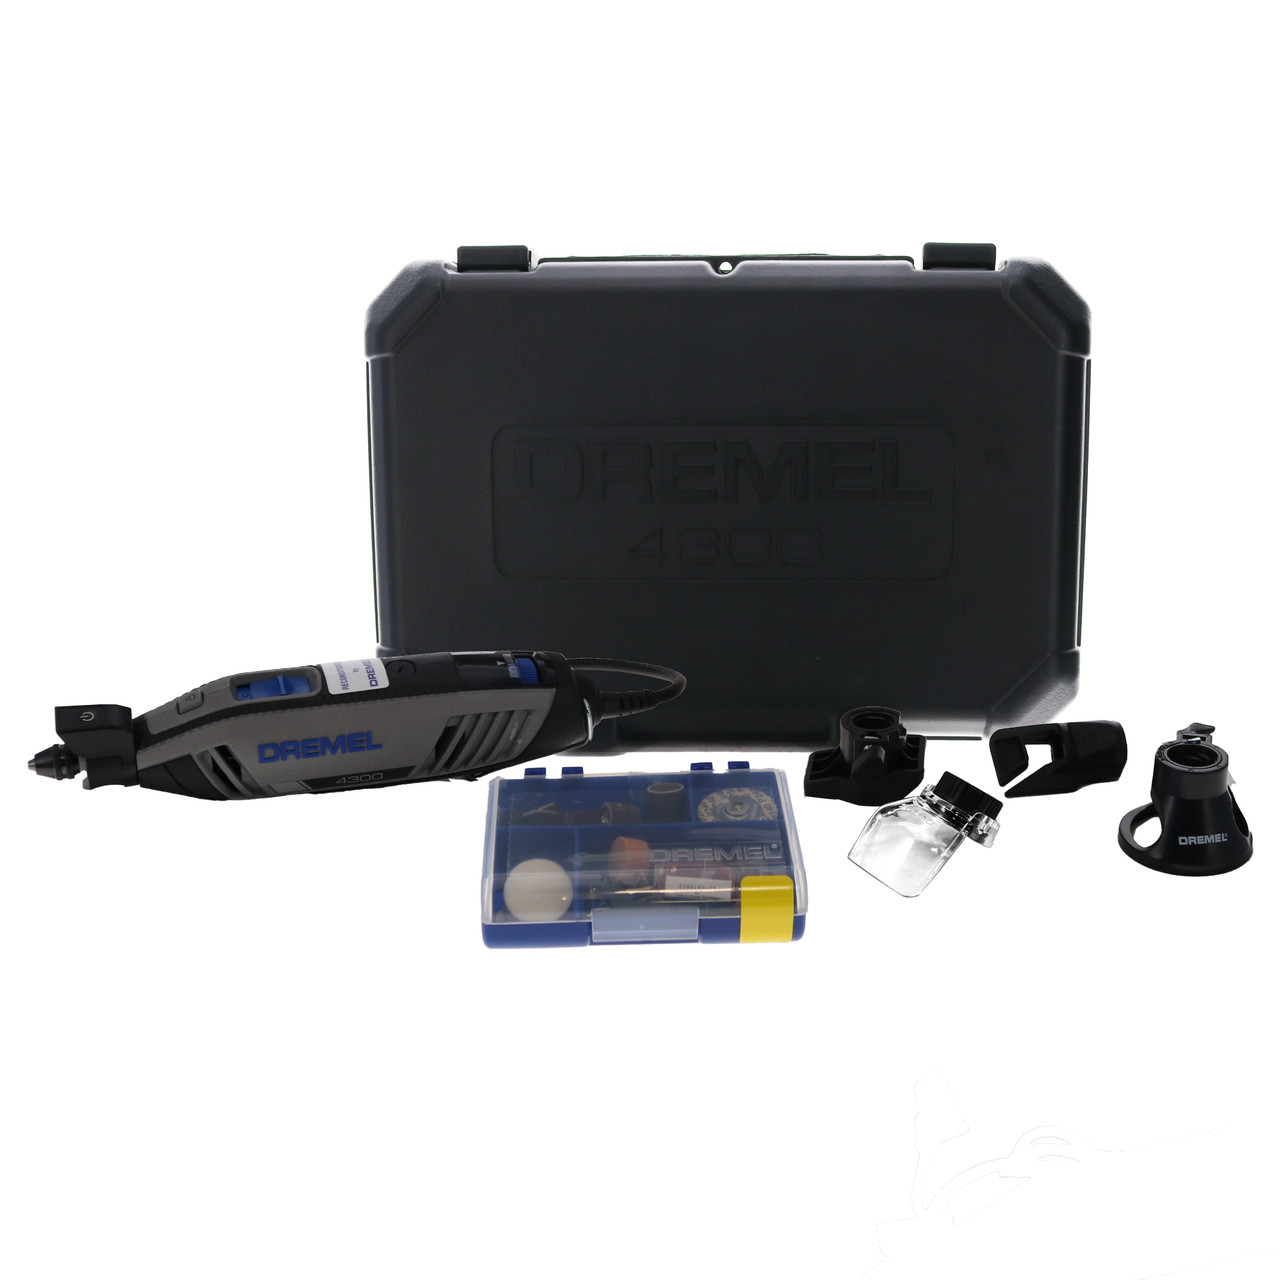 Have a question about Dremel 4300 1.8 Amp Variable Speed 1/32 in